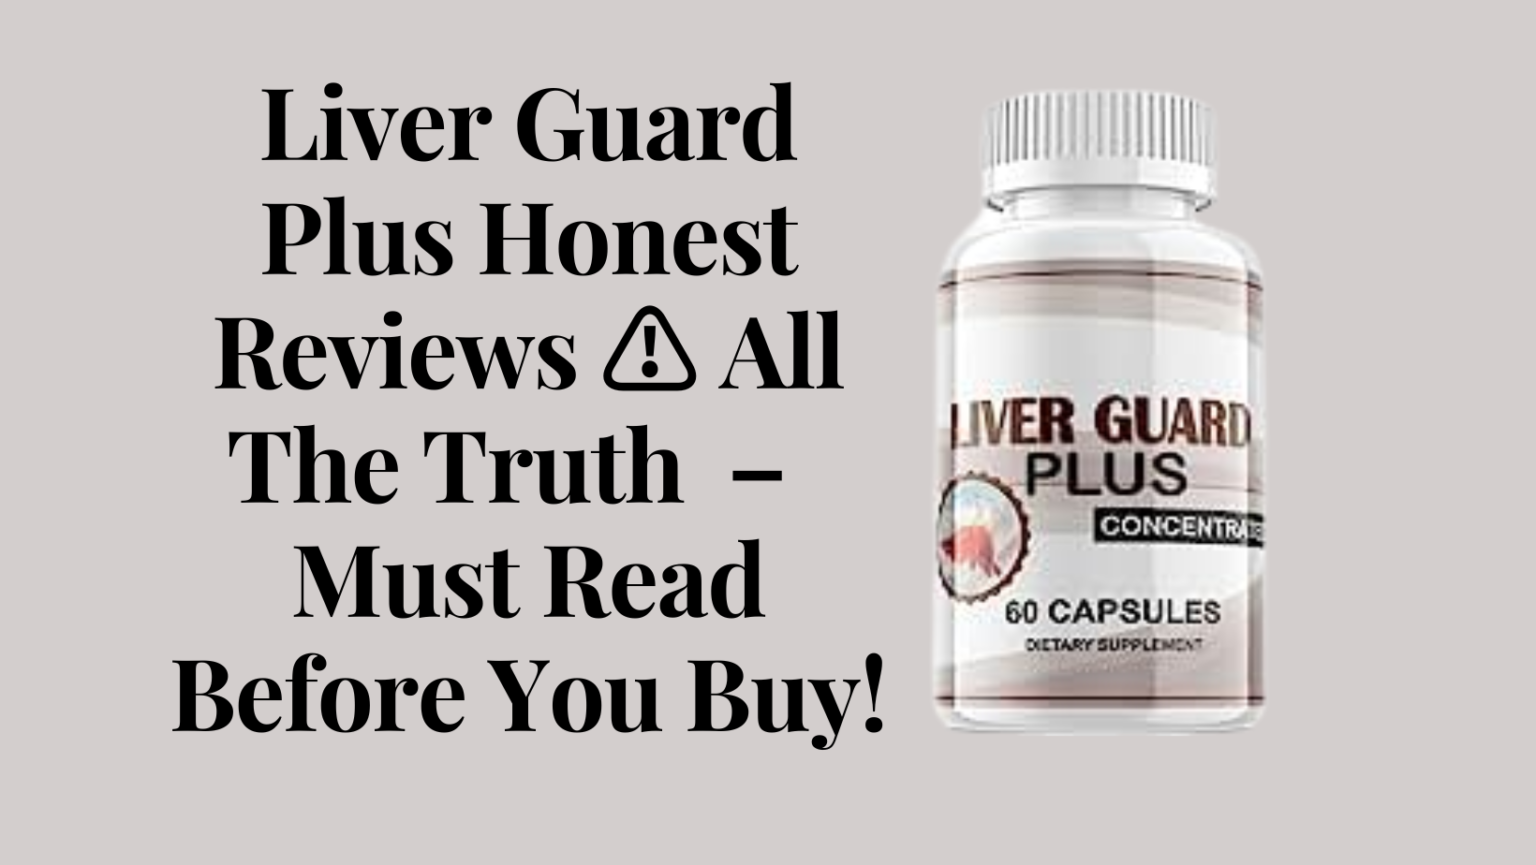 Liver Guard Plus Honest Reviews ⚠️ All The Truth – Must Read Before You Buy!